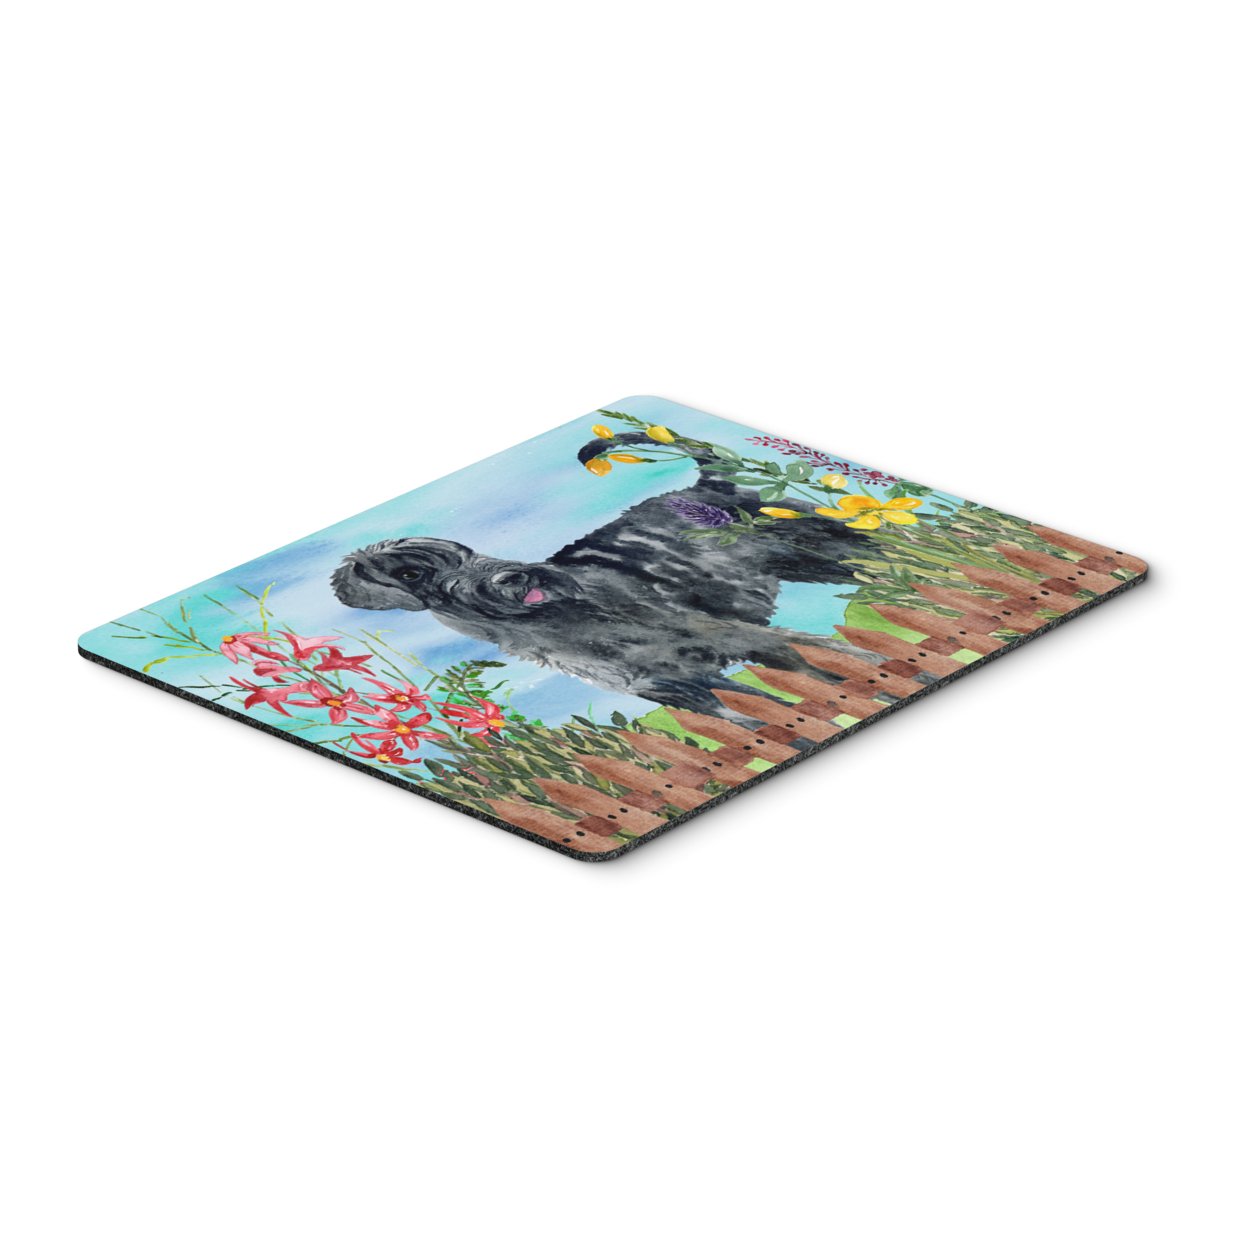 Carolines Treasures CK1222MP Giant Schnauzer Spring Mouse Pad, Hot Pad or Trivet, Large, multicolor - image 1 of 1